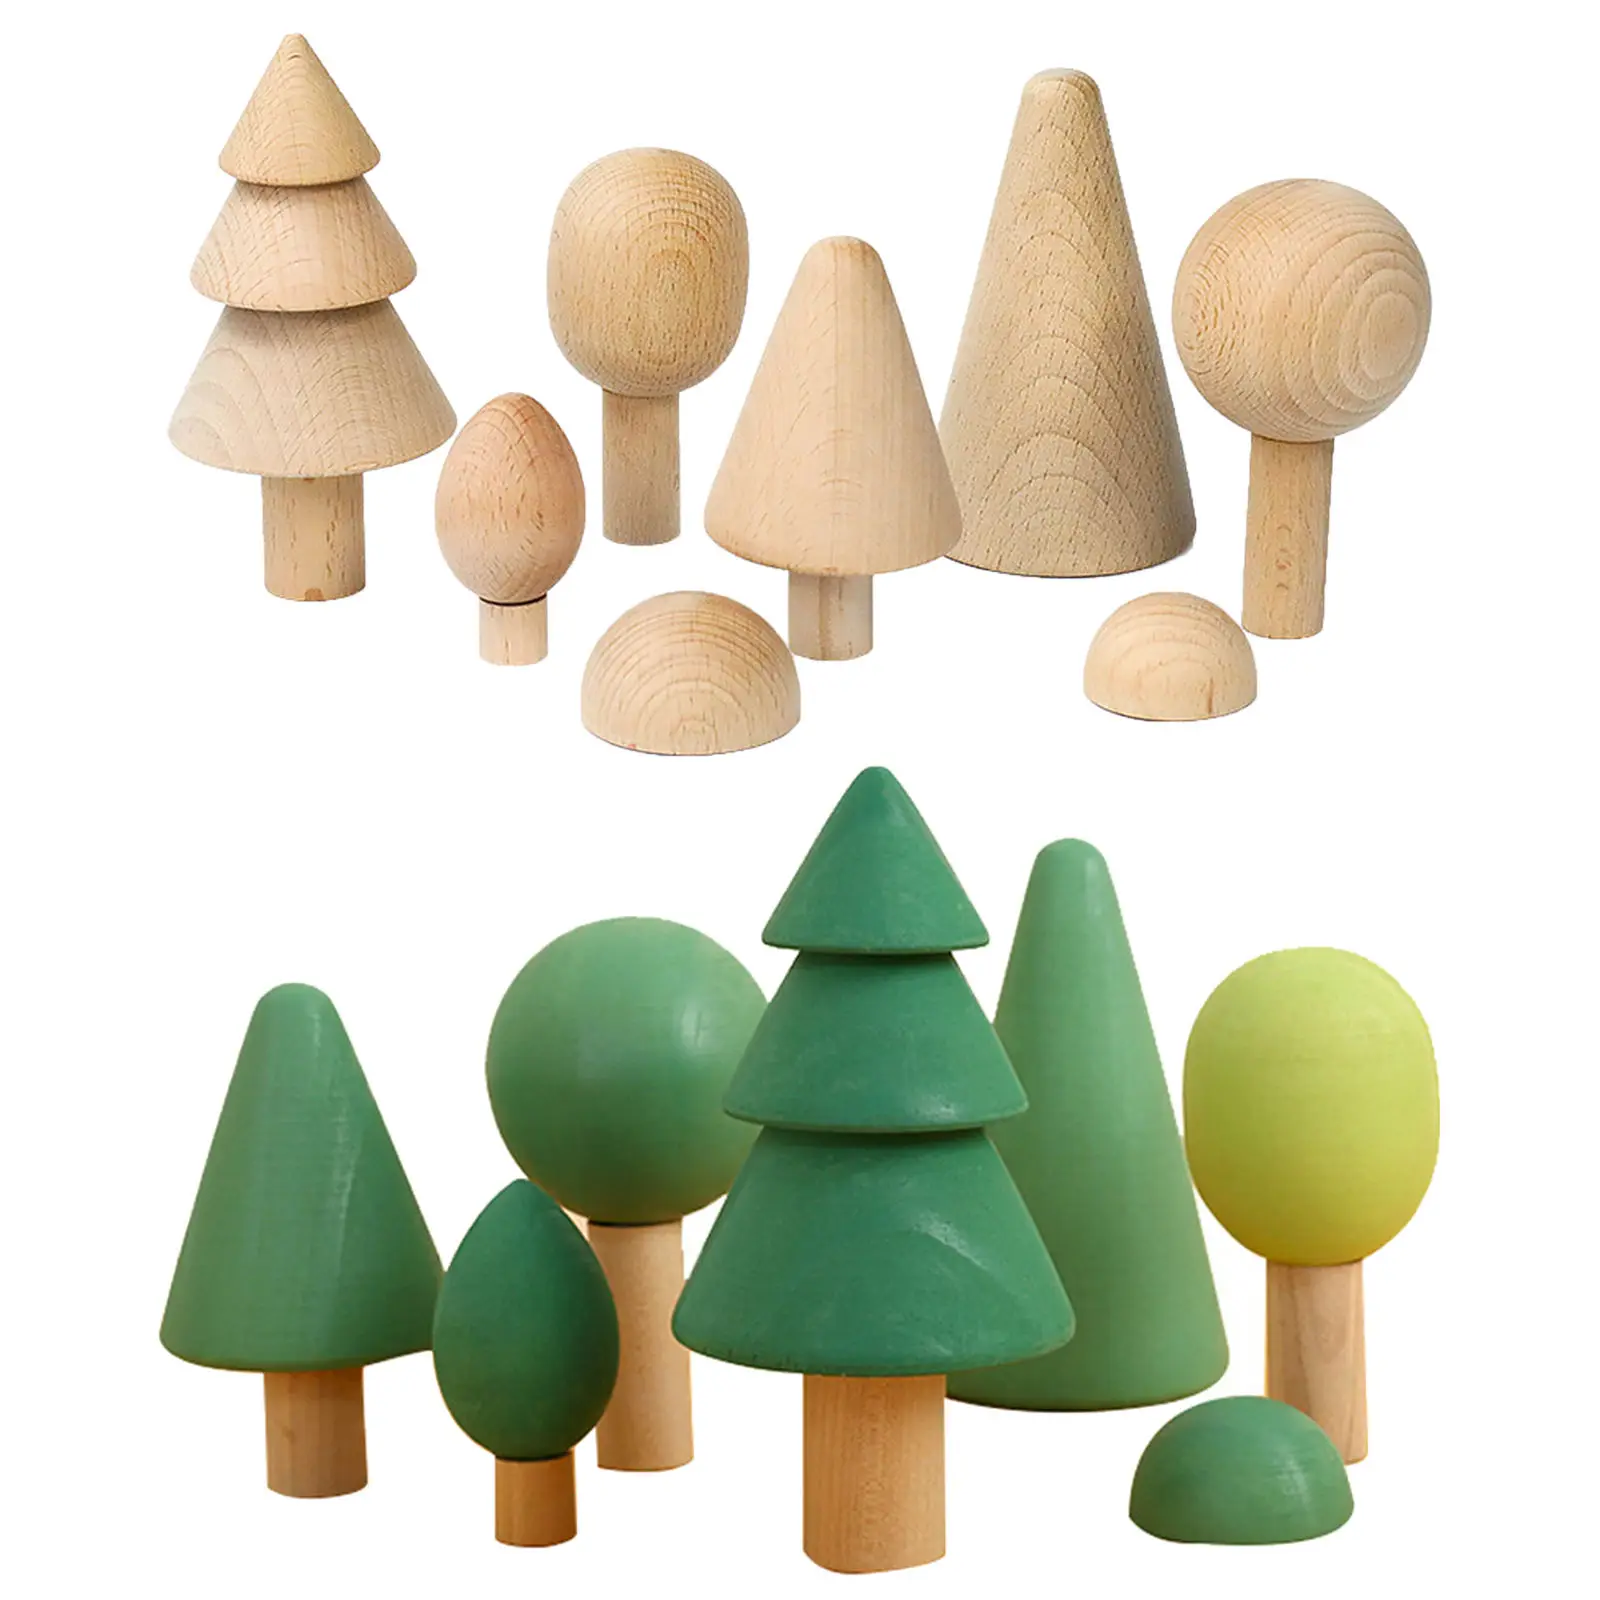 7 PCs Wooden Tree Shape Blcoks Sorting Stacking Educational Preschool Learning Toys Set for Kids 3 Years Old